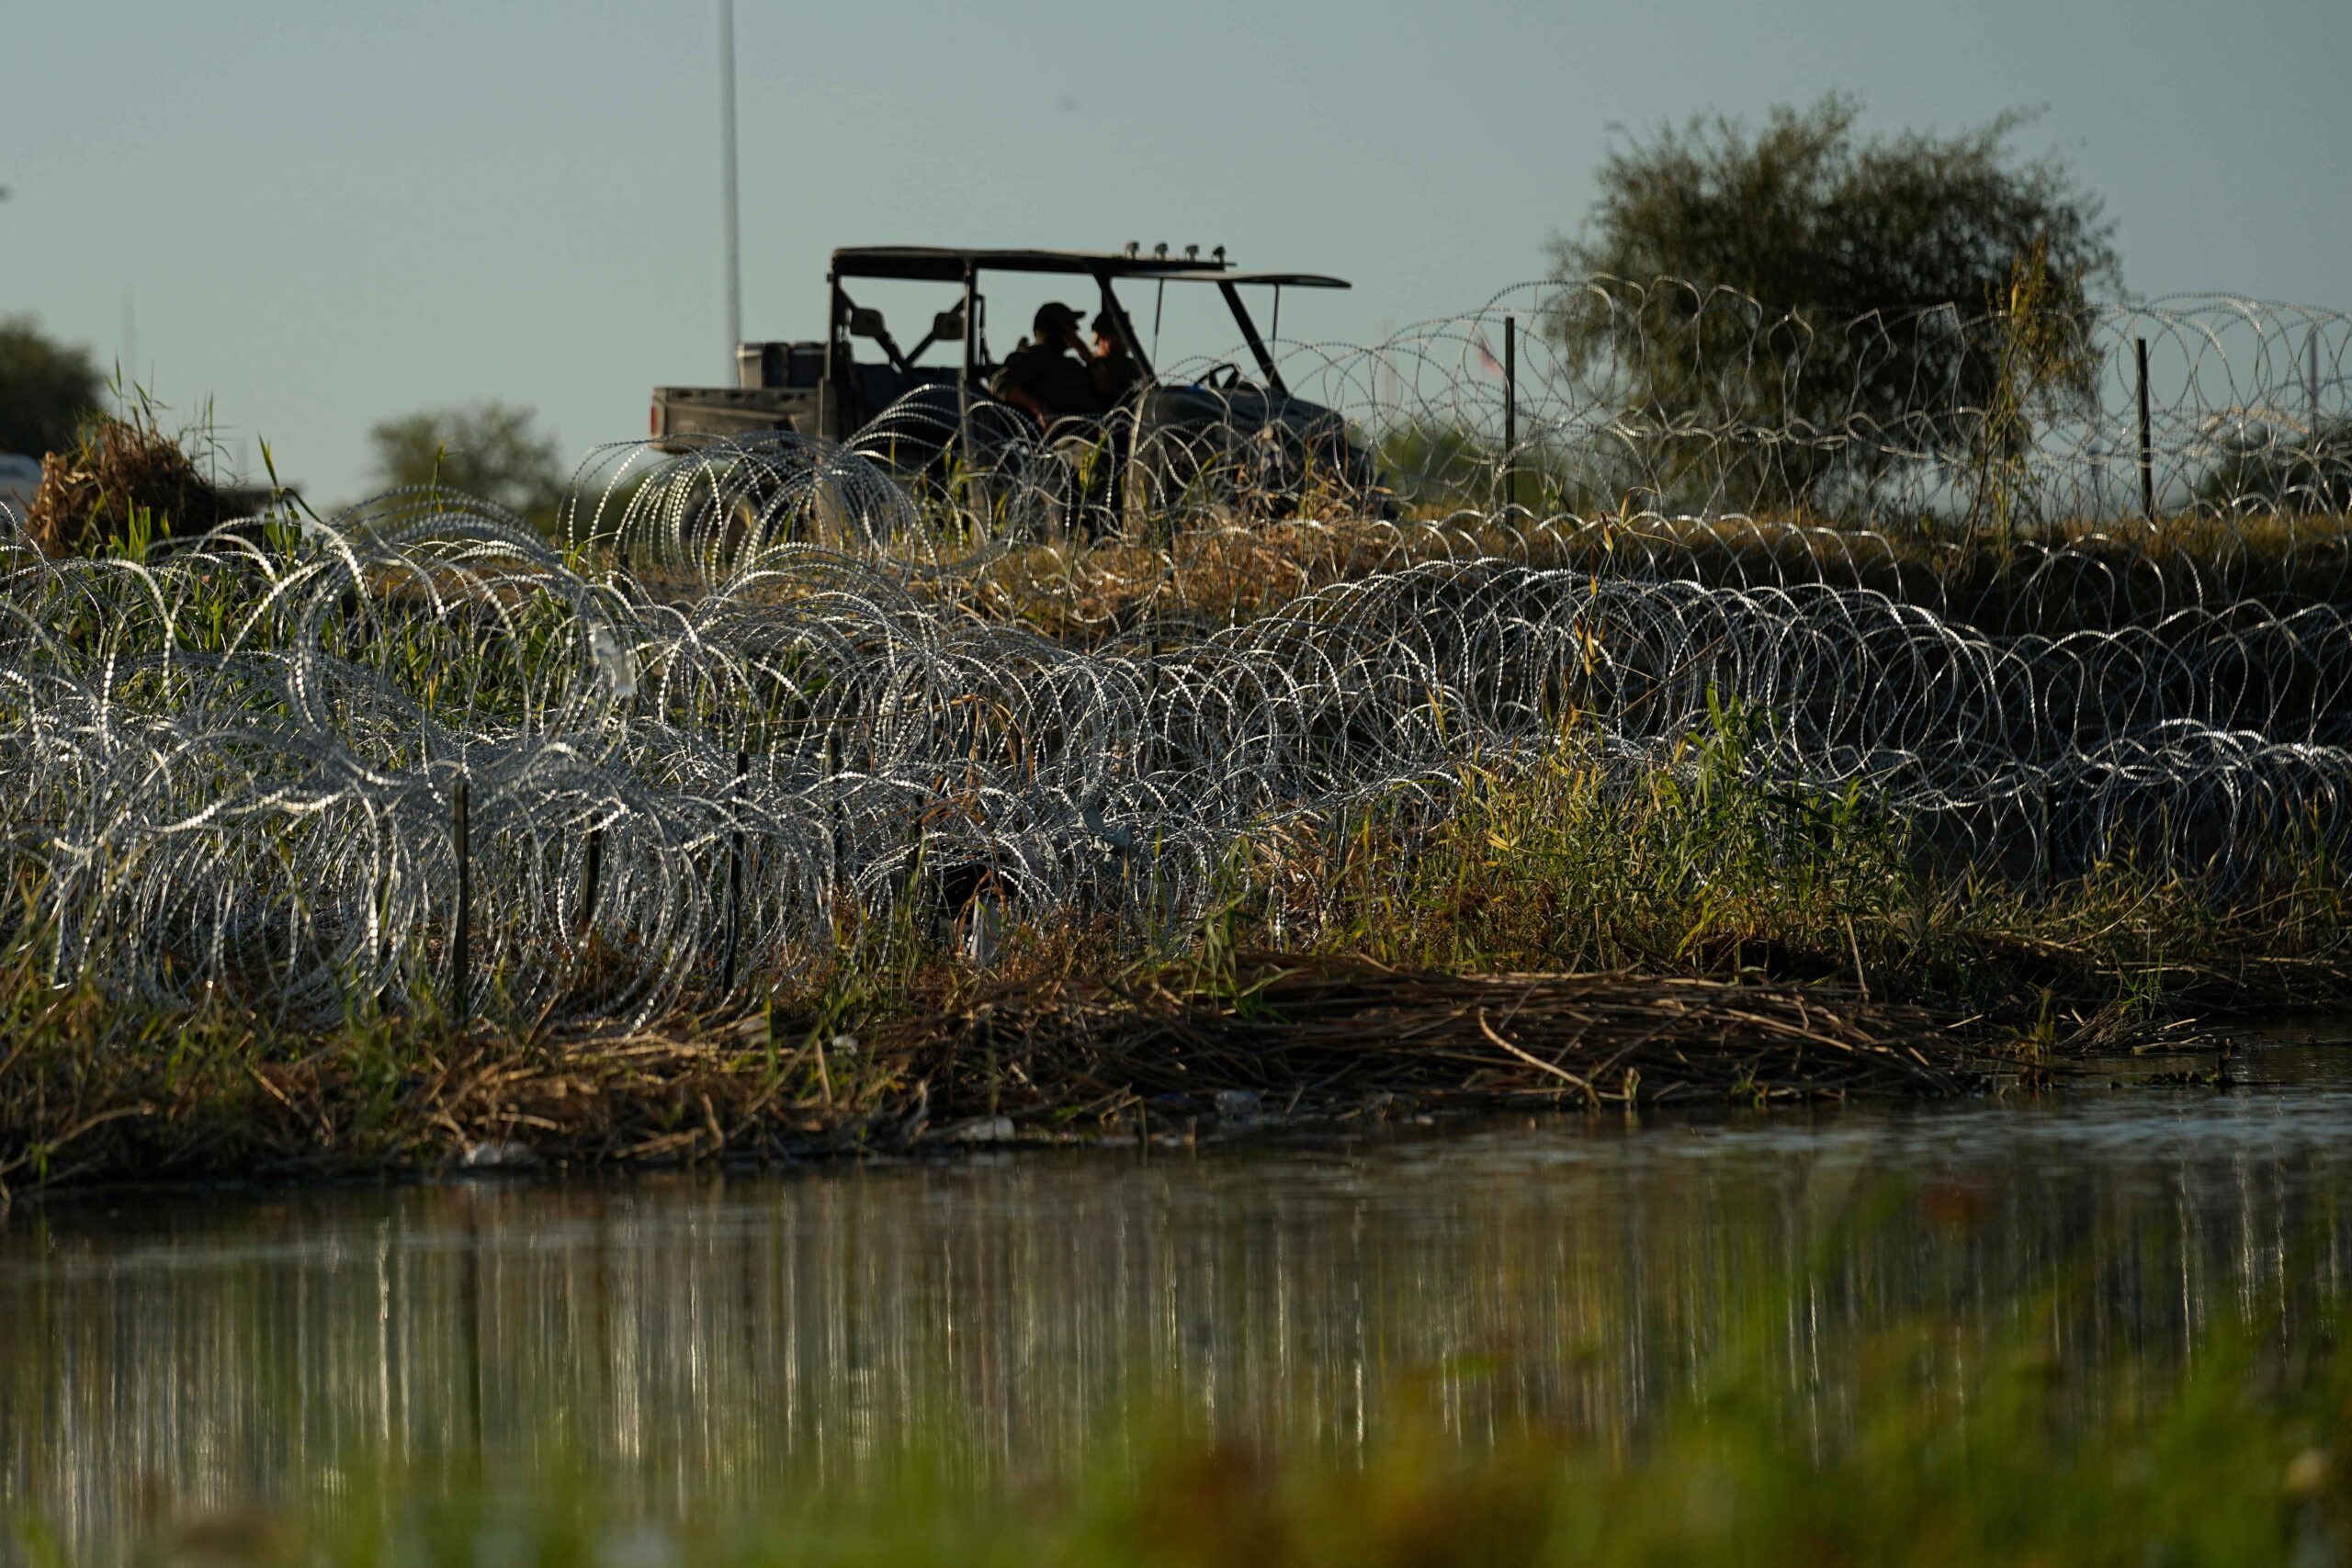 The Texas National Guard seized control of Shelby Park near the US-Mexico border on Wednesday, accusing federal officials of "perpetuating illegal crossings."